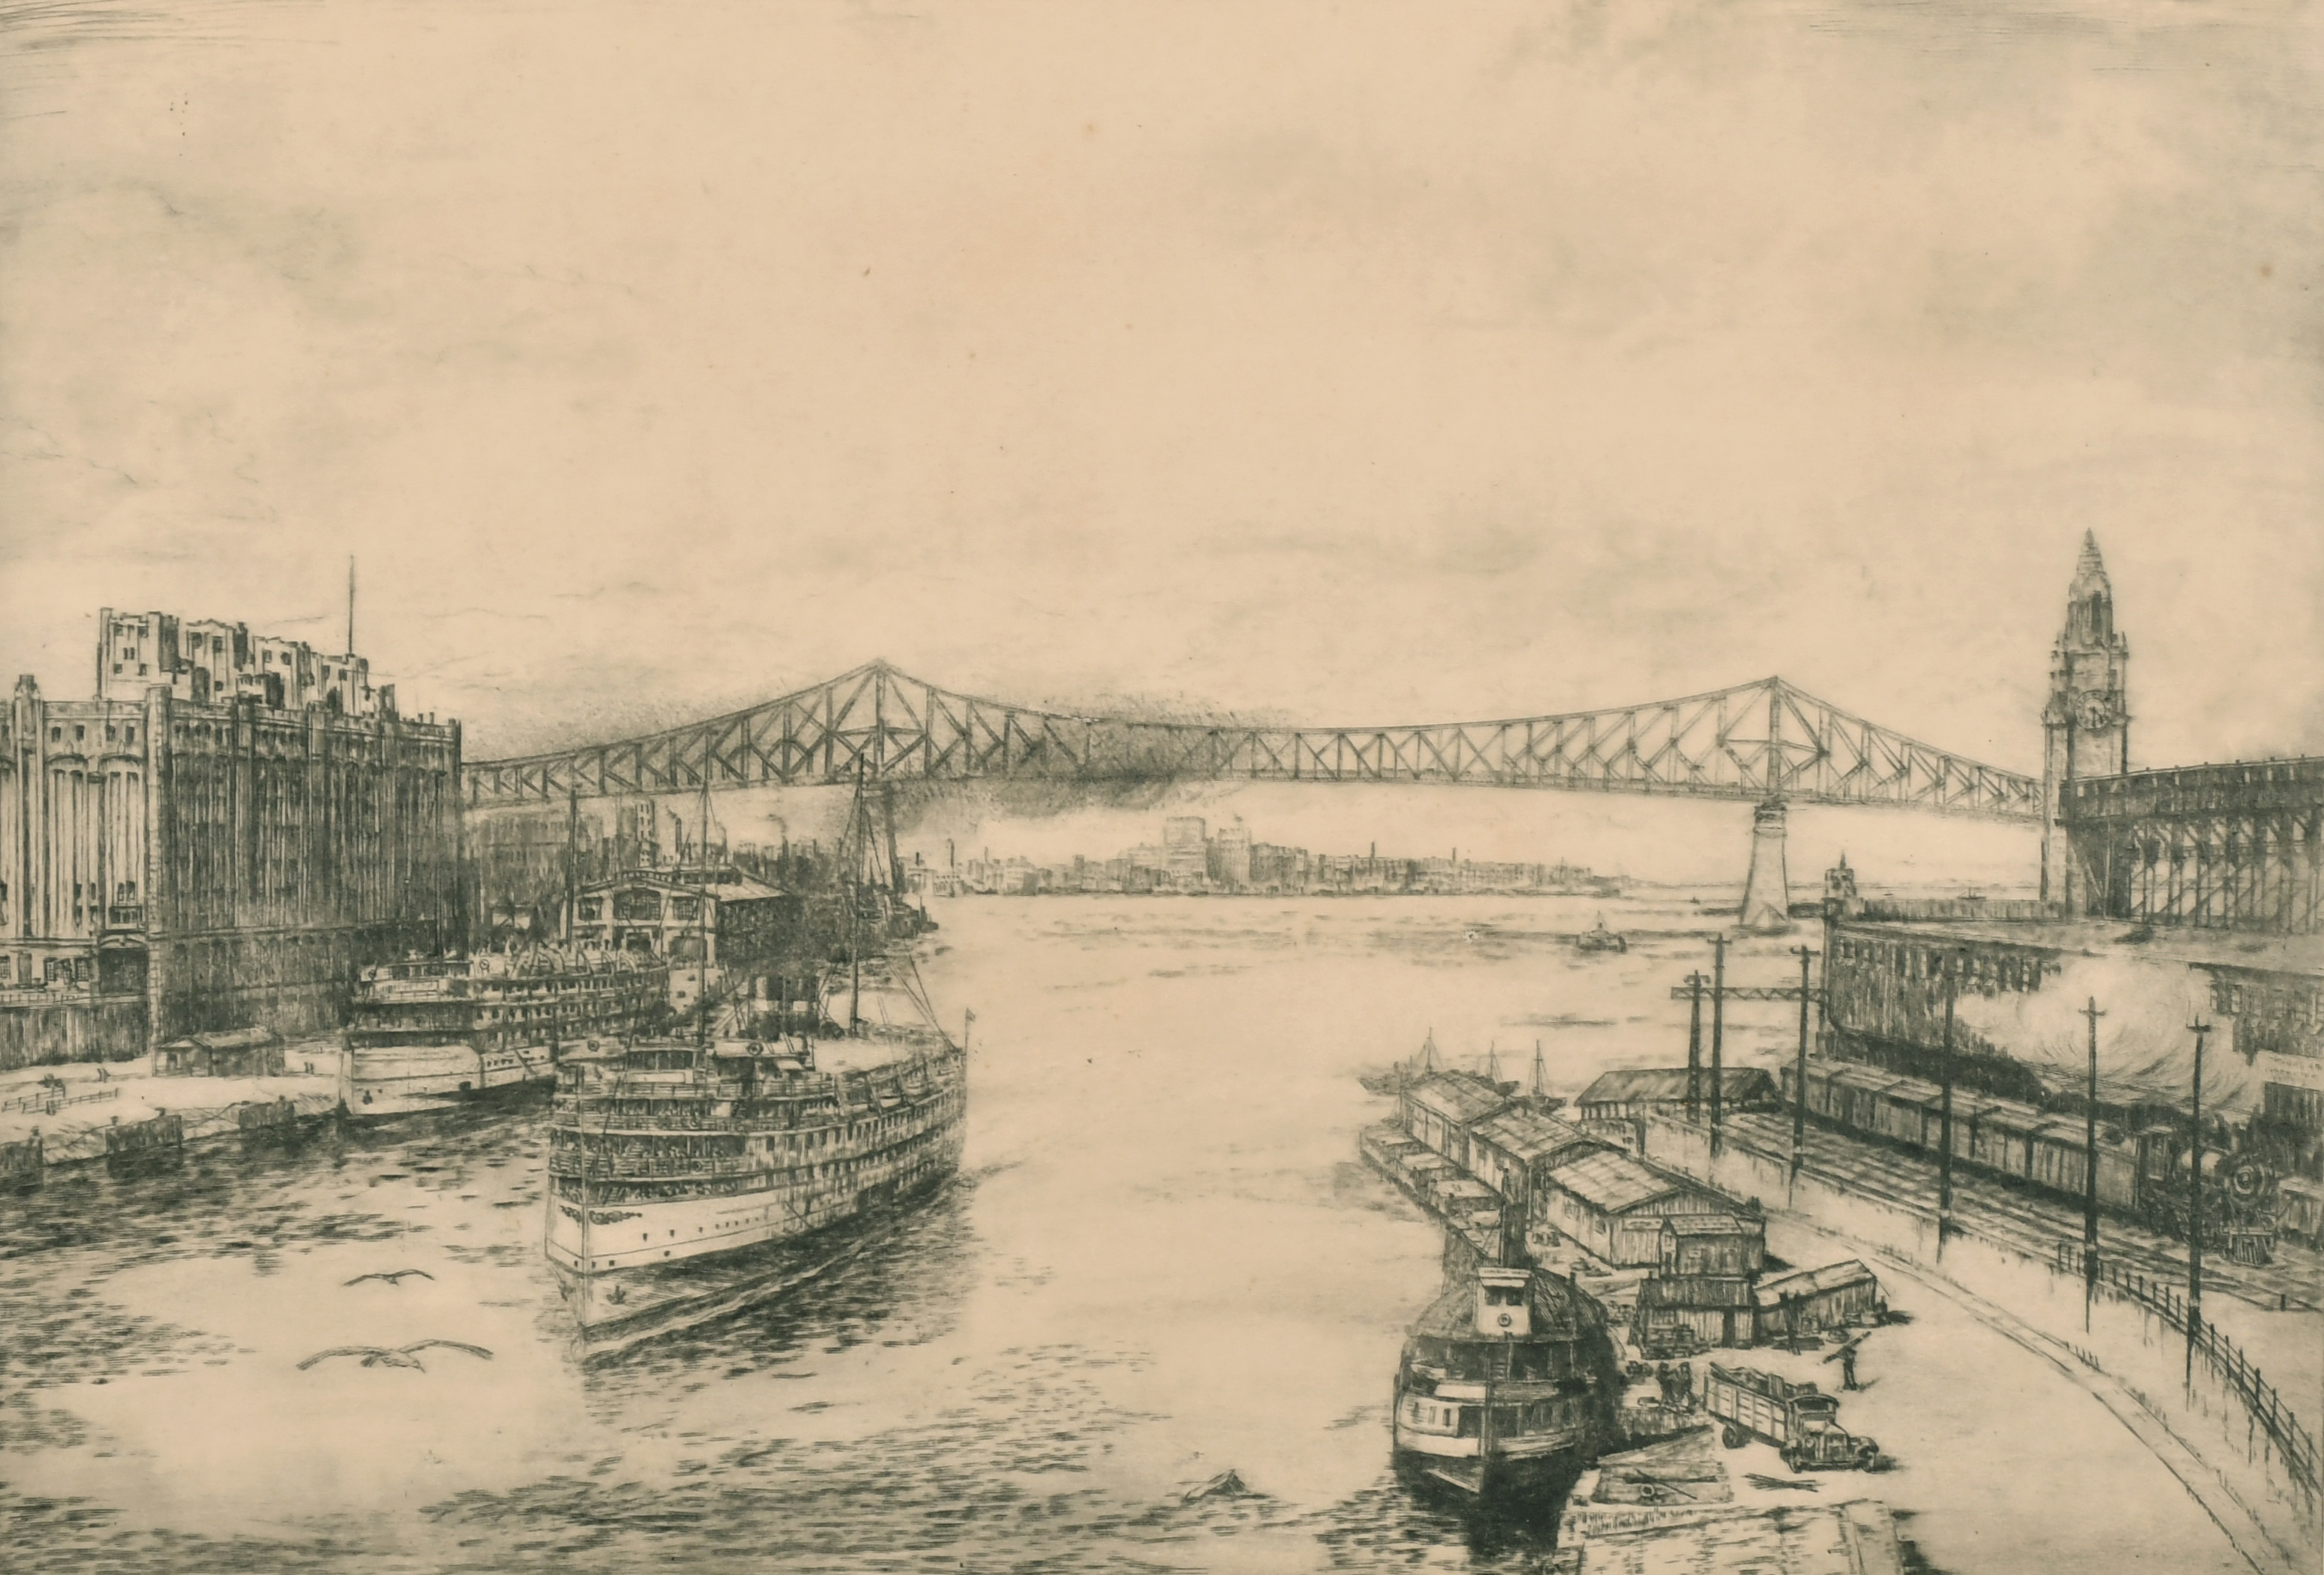 John H Yates (20th Century) Continental. "Victorian Dock & Harbour Bridge", Etching, Signed and